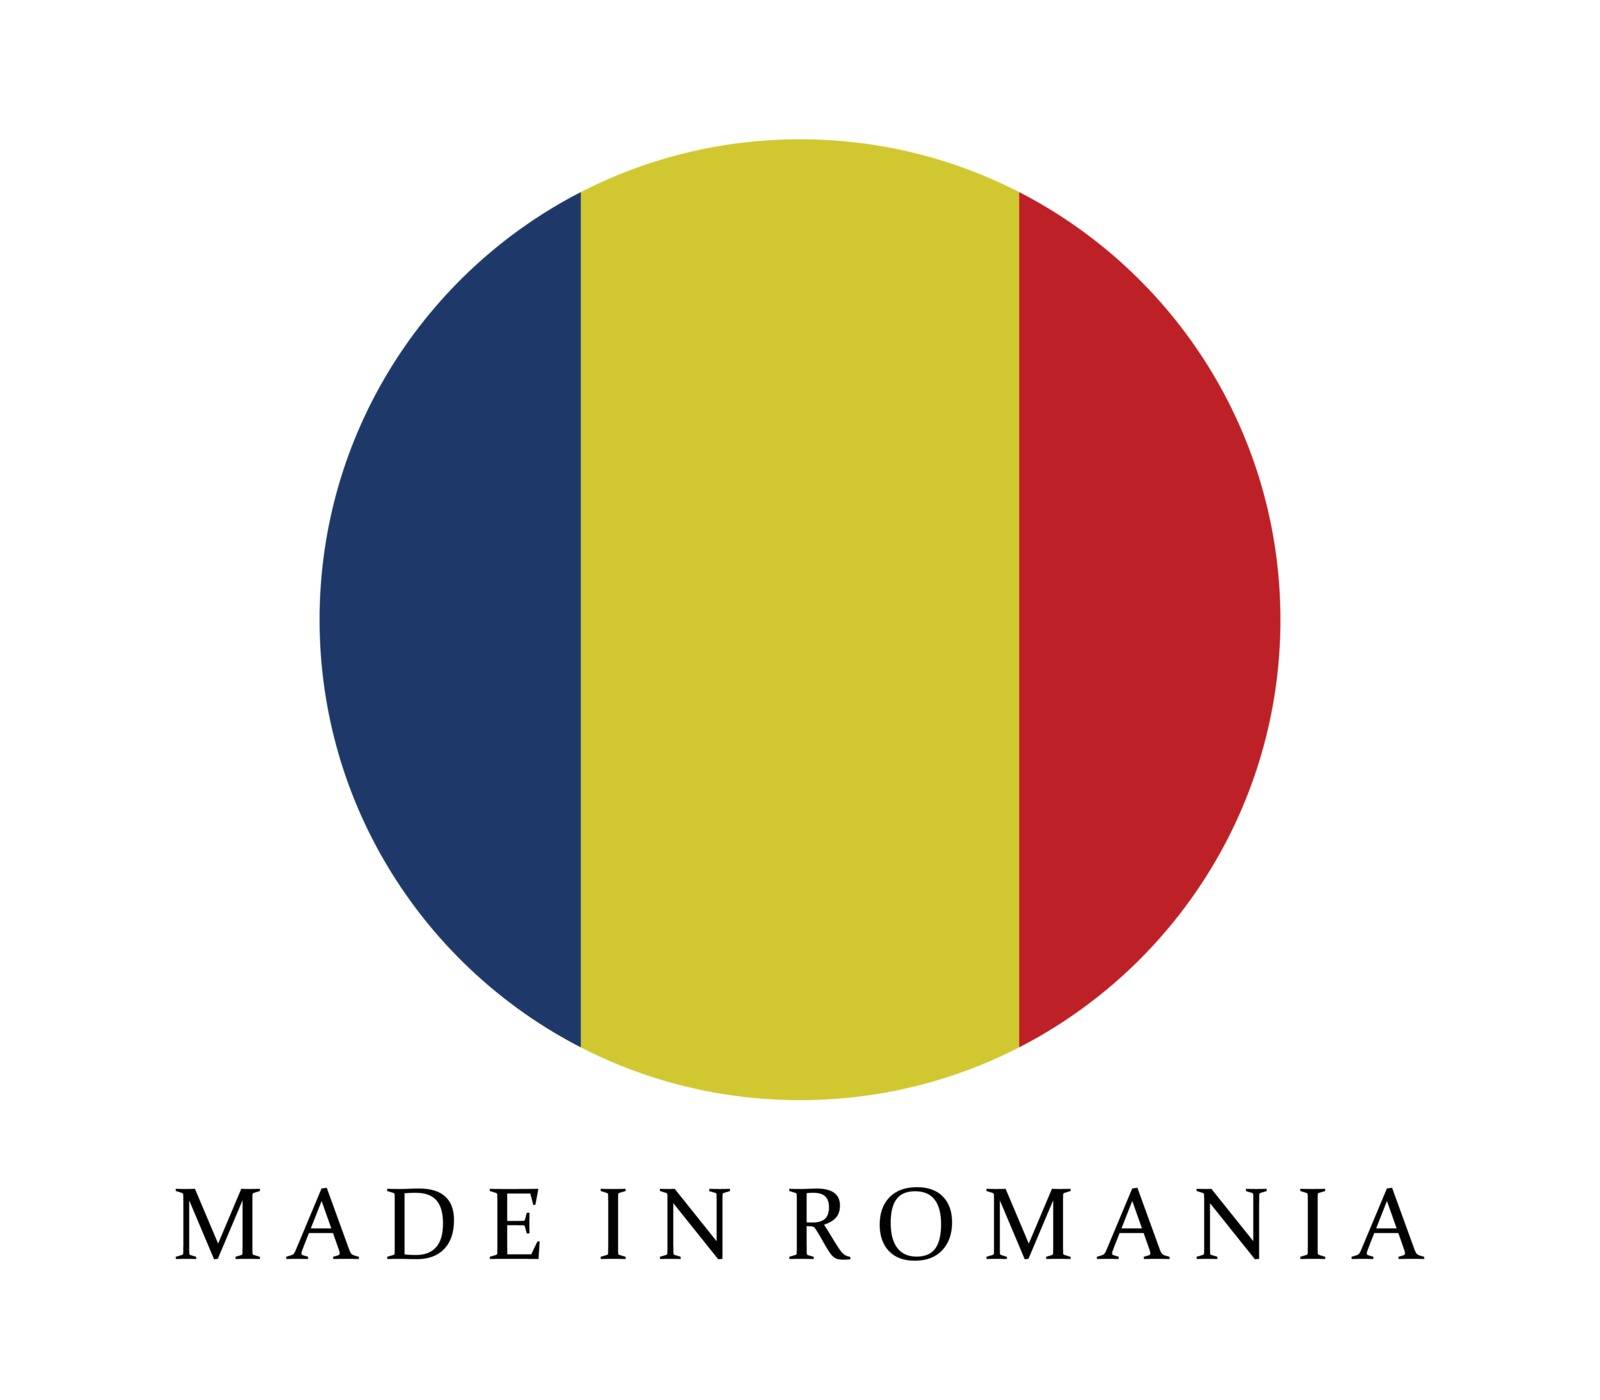 made in romania by Mark1987